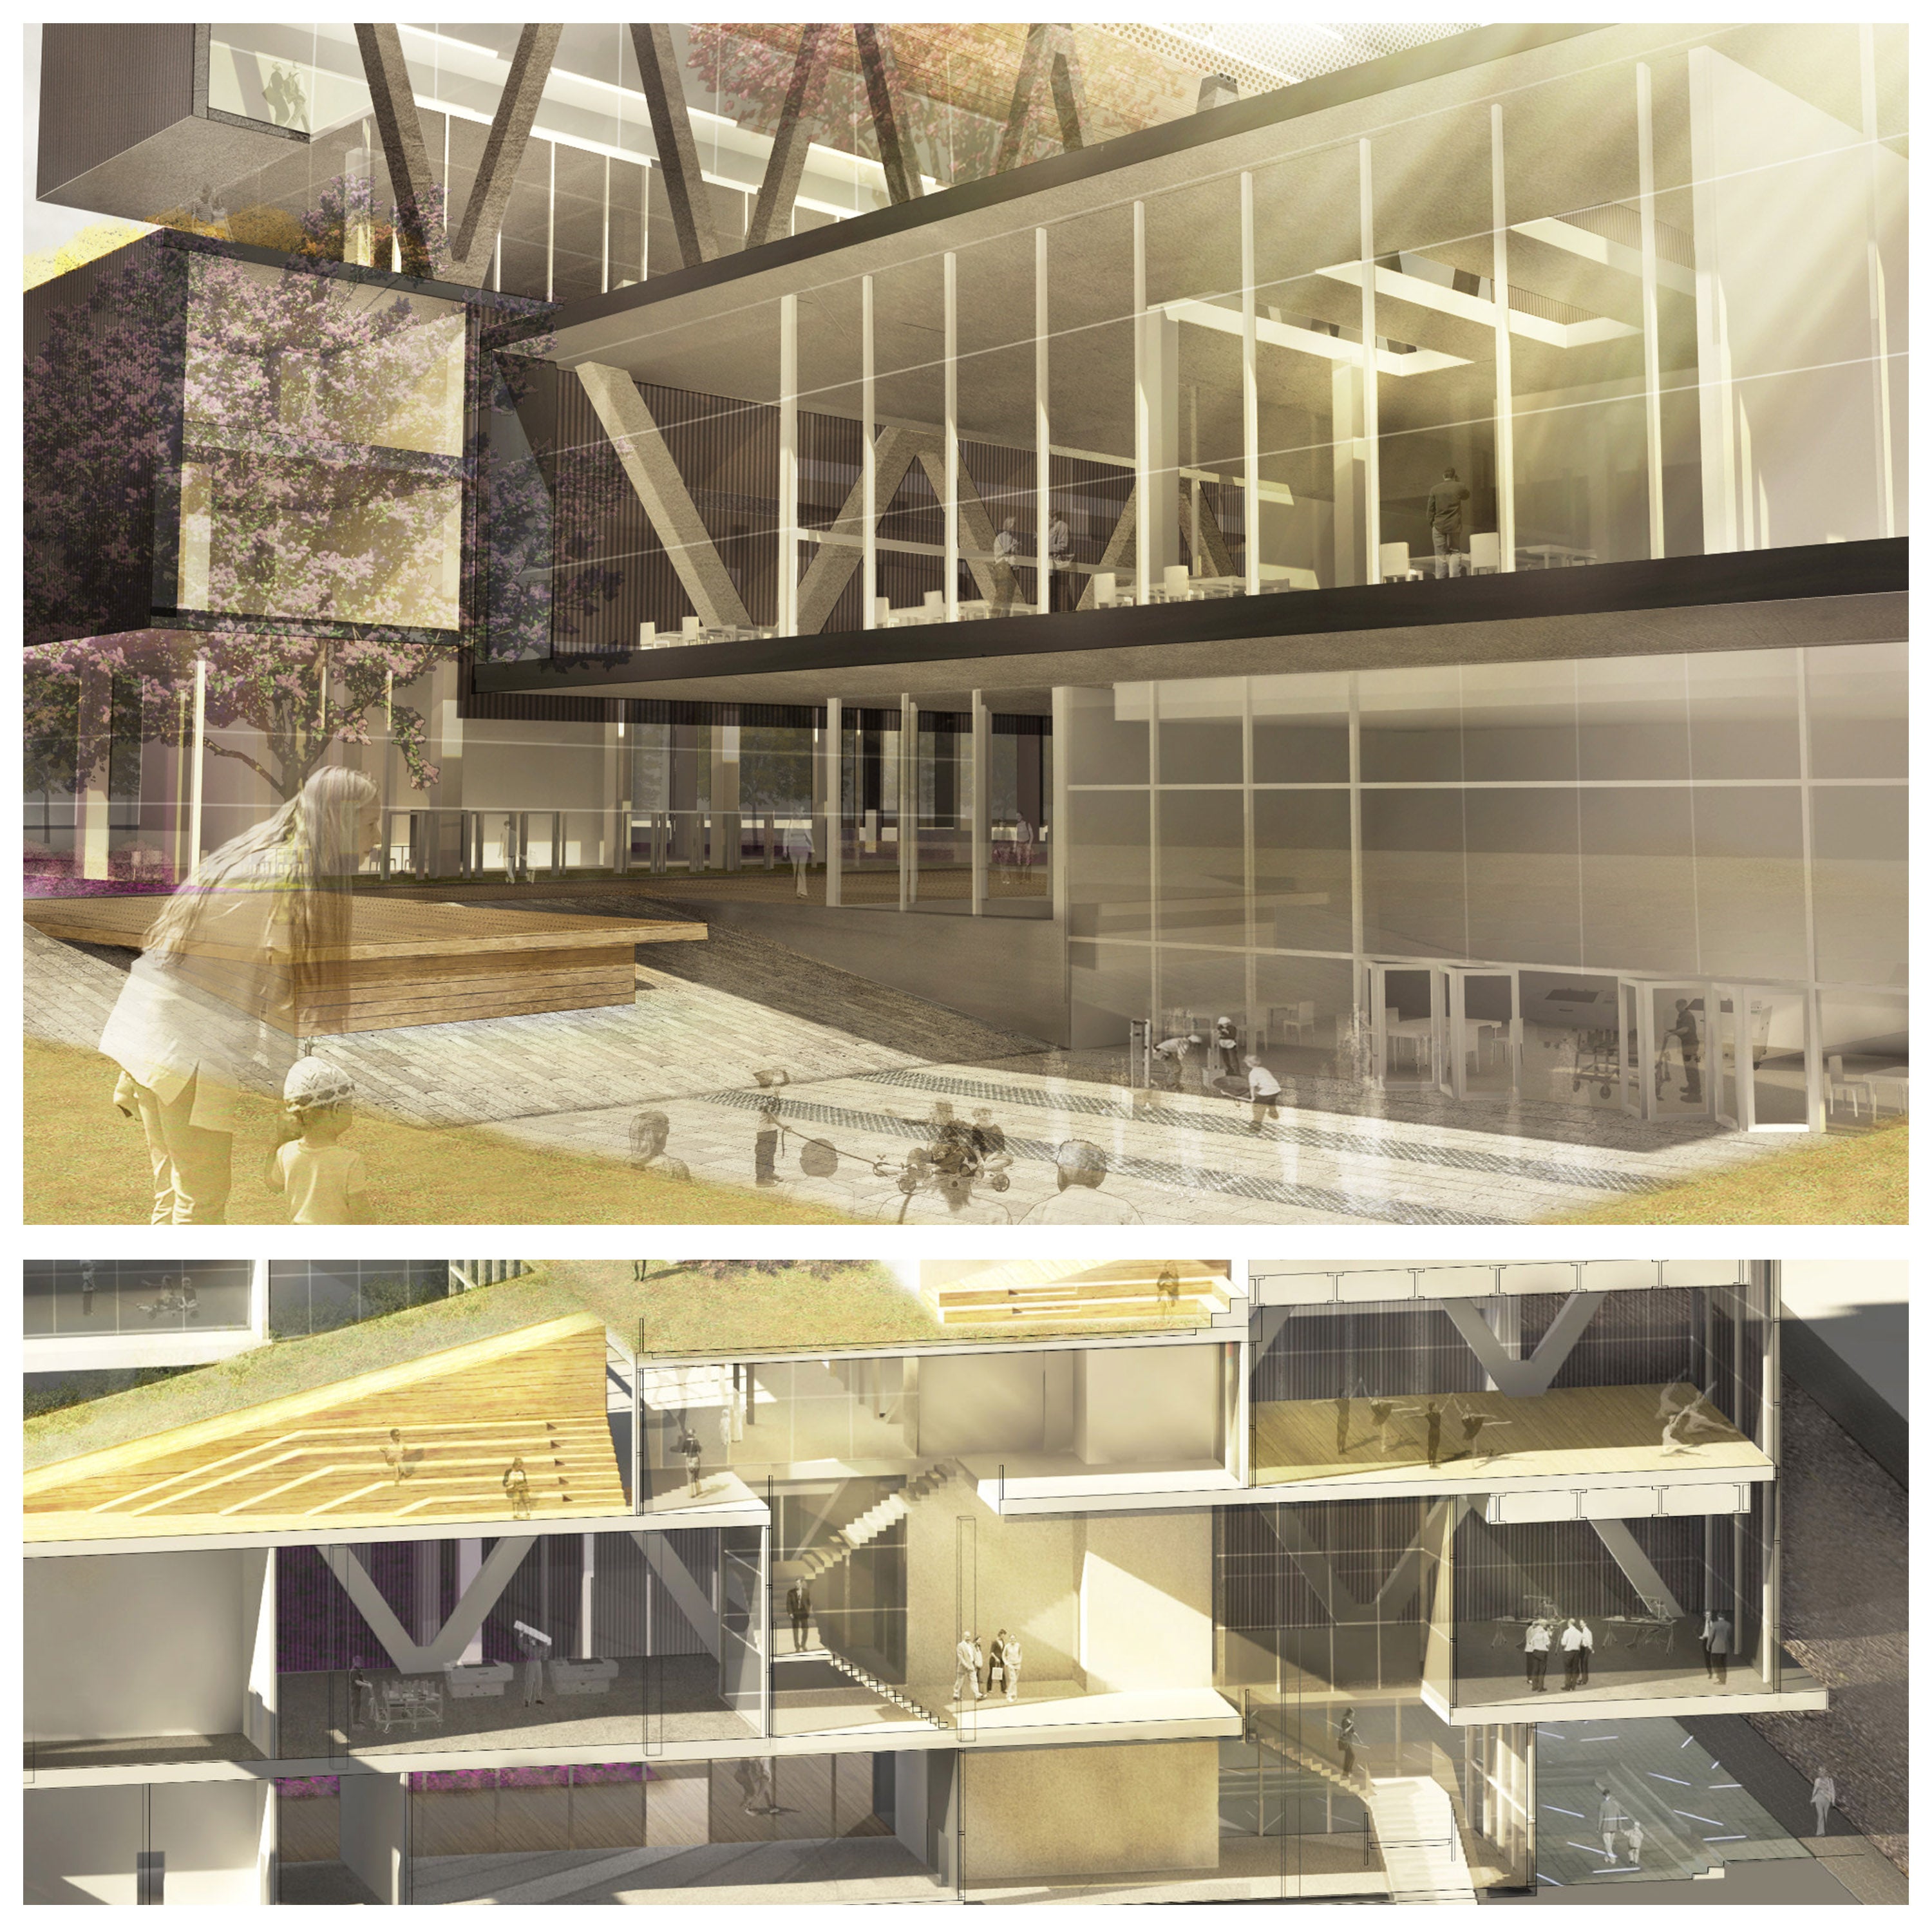 Two exterior renderings of the building. One showcasing the public space the design creates and the other showcases the interior